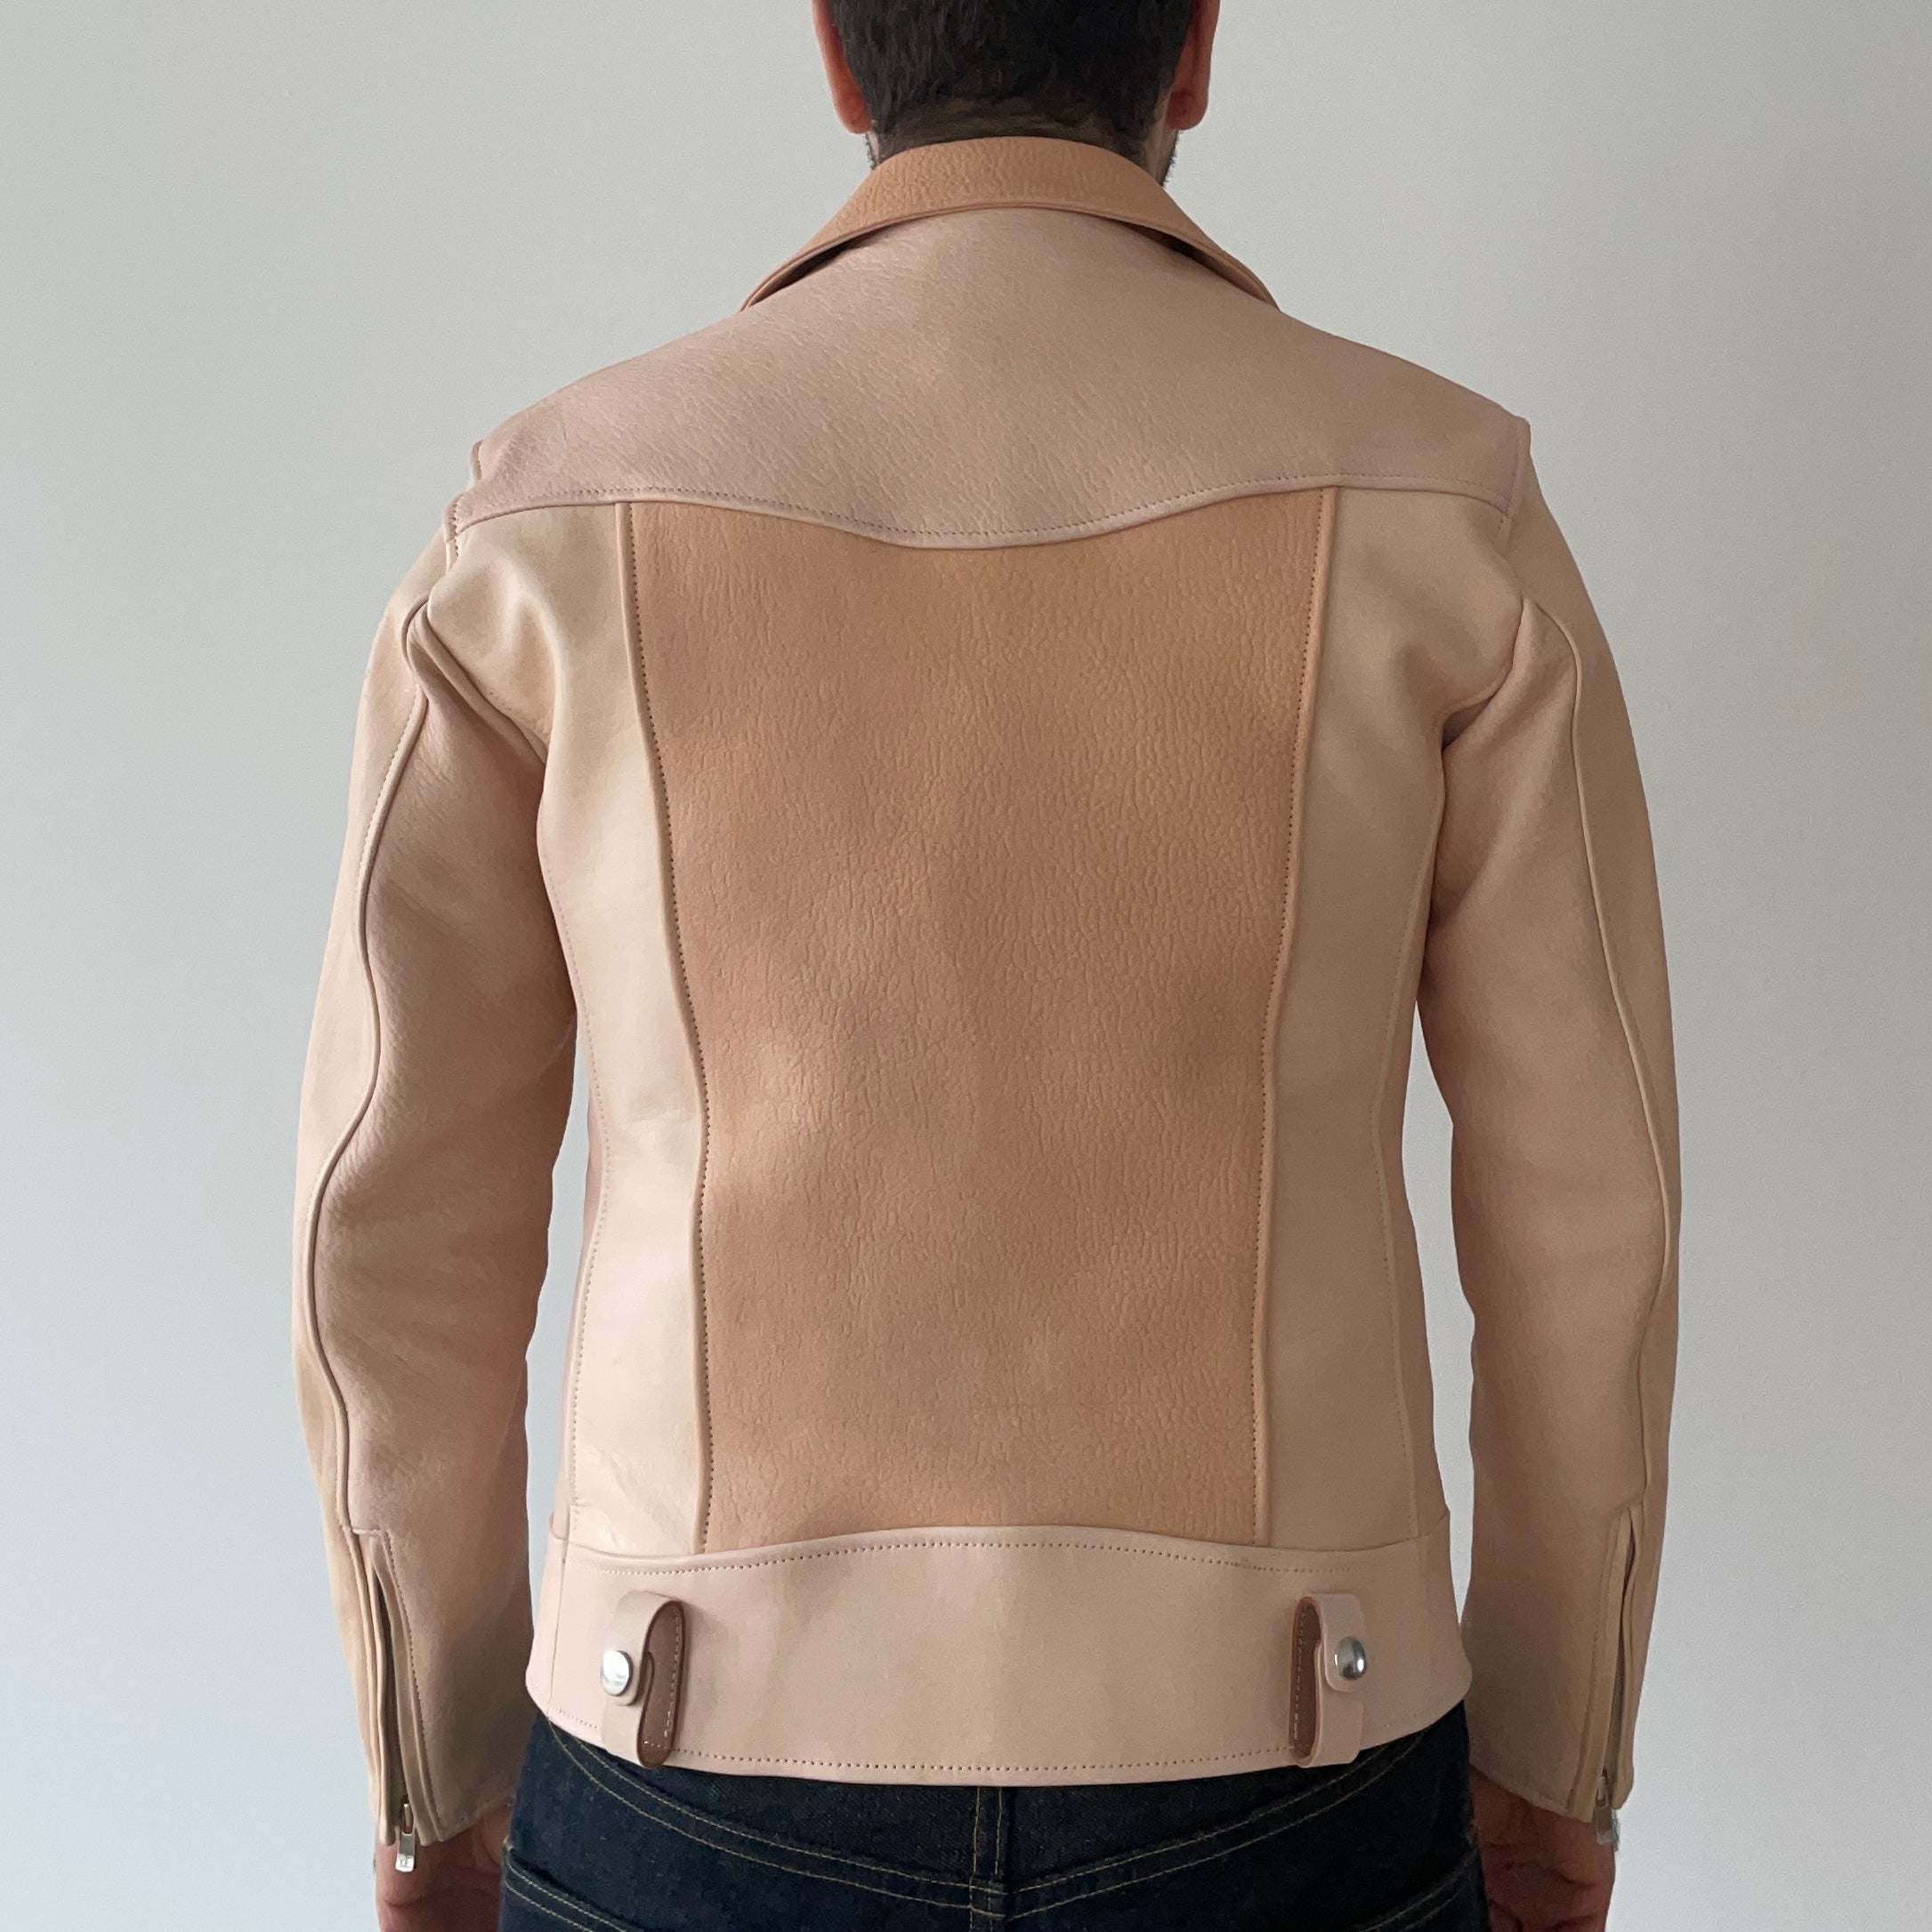 HENDER SCHEME Not Riders Jacket in Natural TEMPO LAUSANNE 